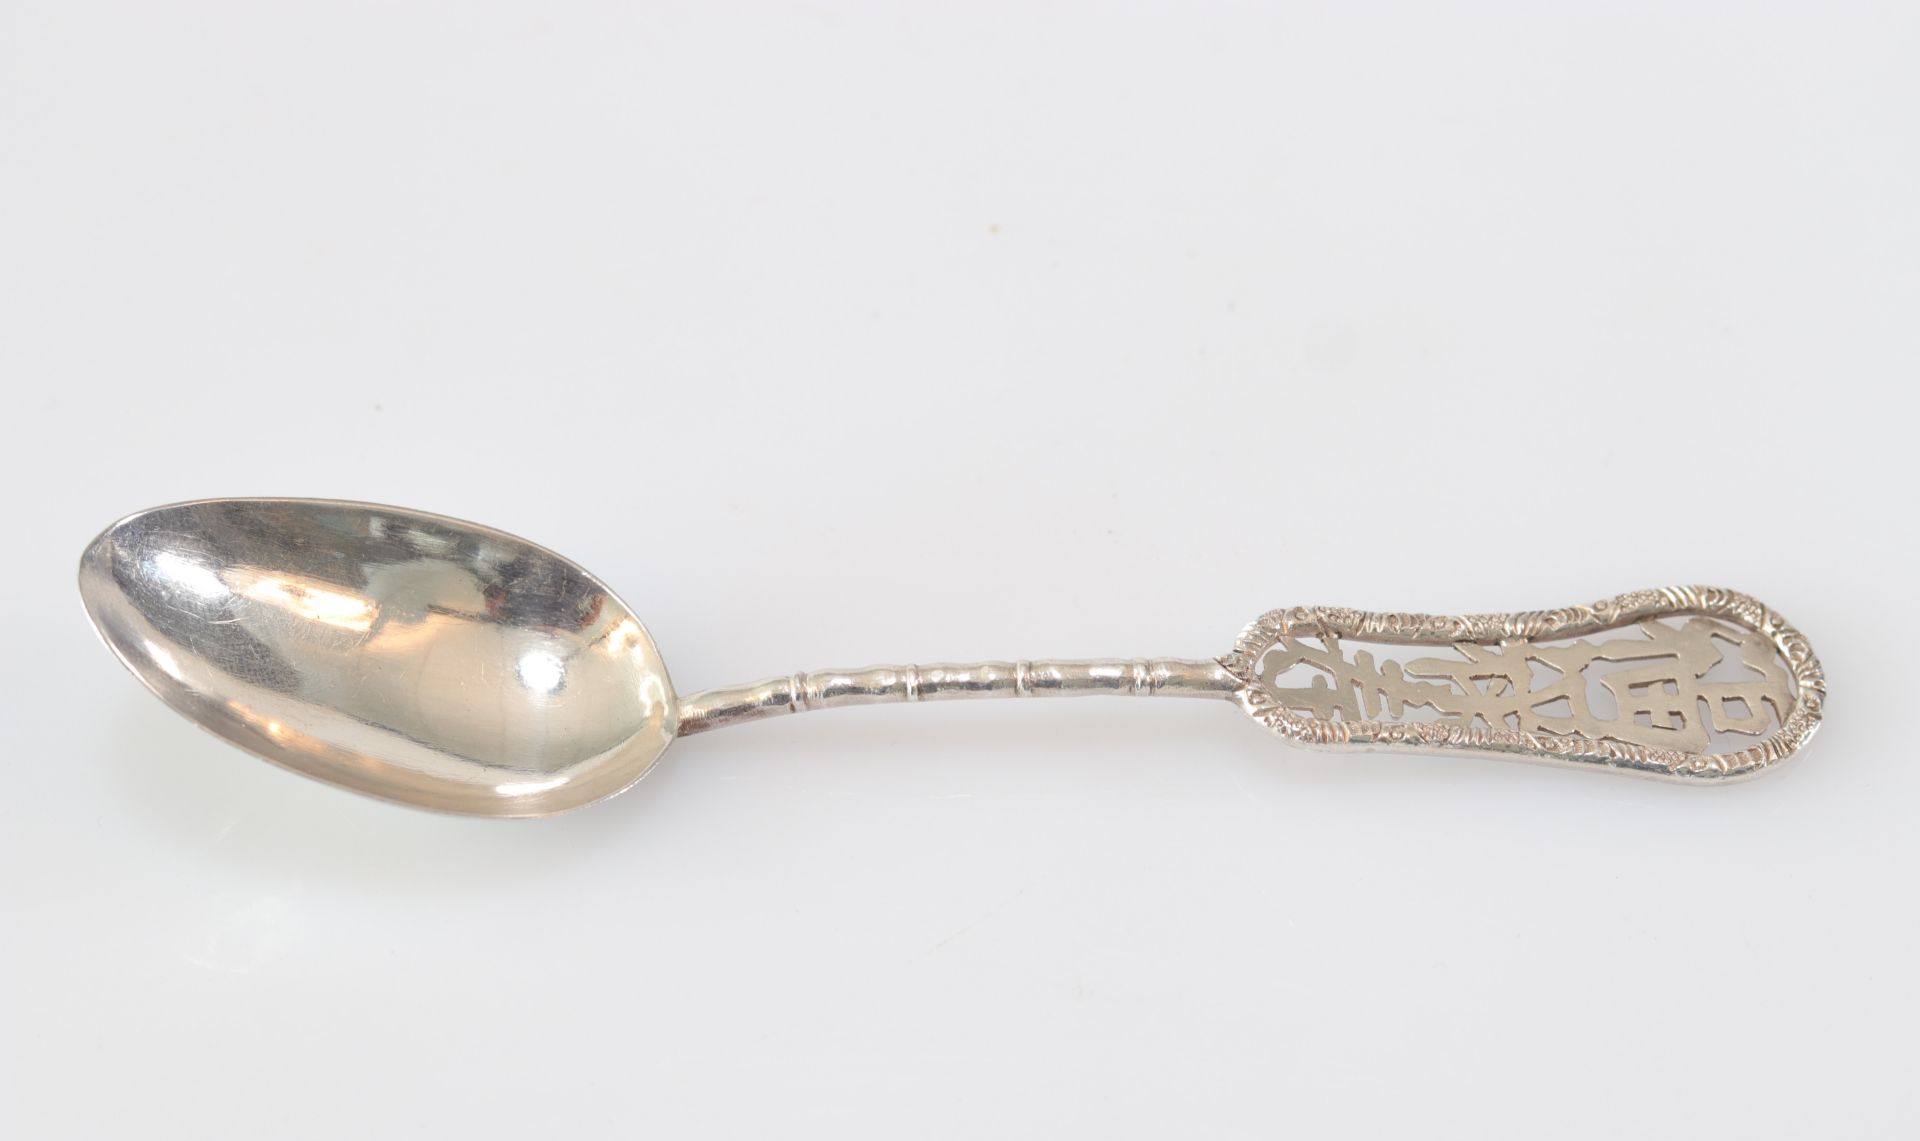 Silver box and 2 silver spoons. Hallmarks. 20th century china - Image 3 of 7